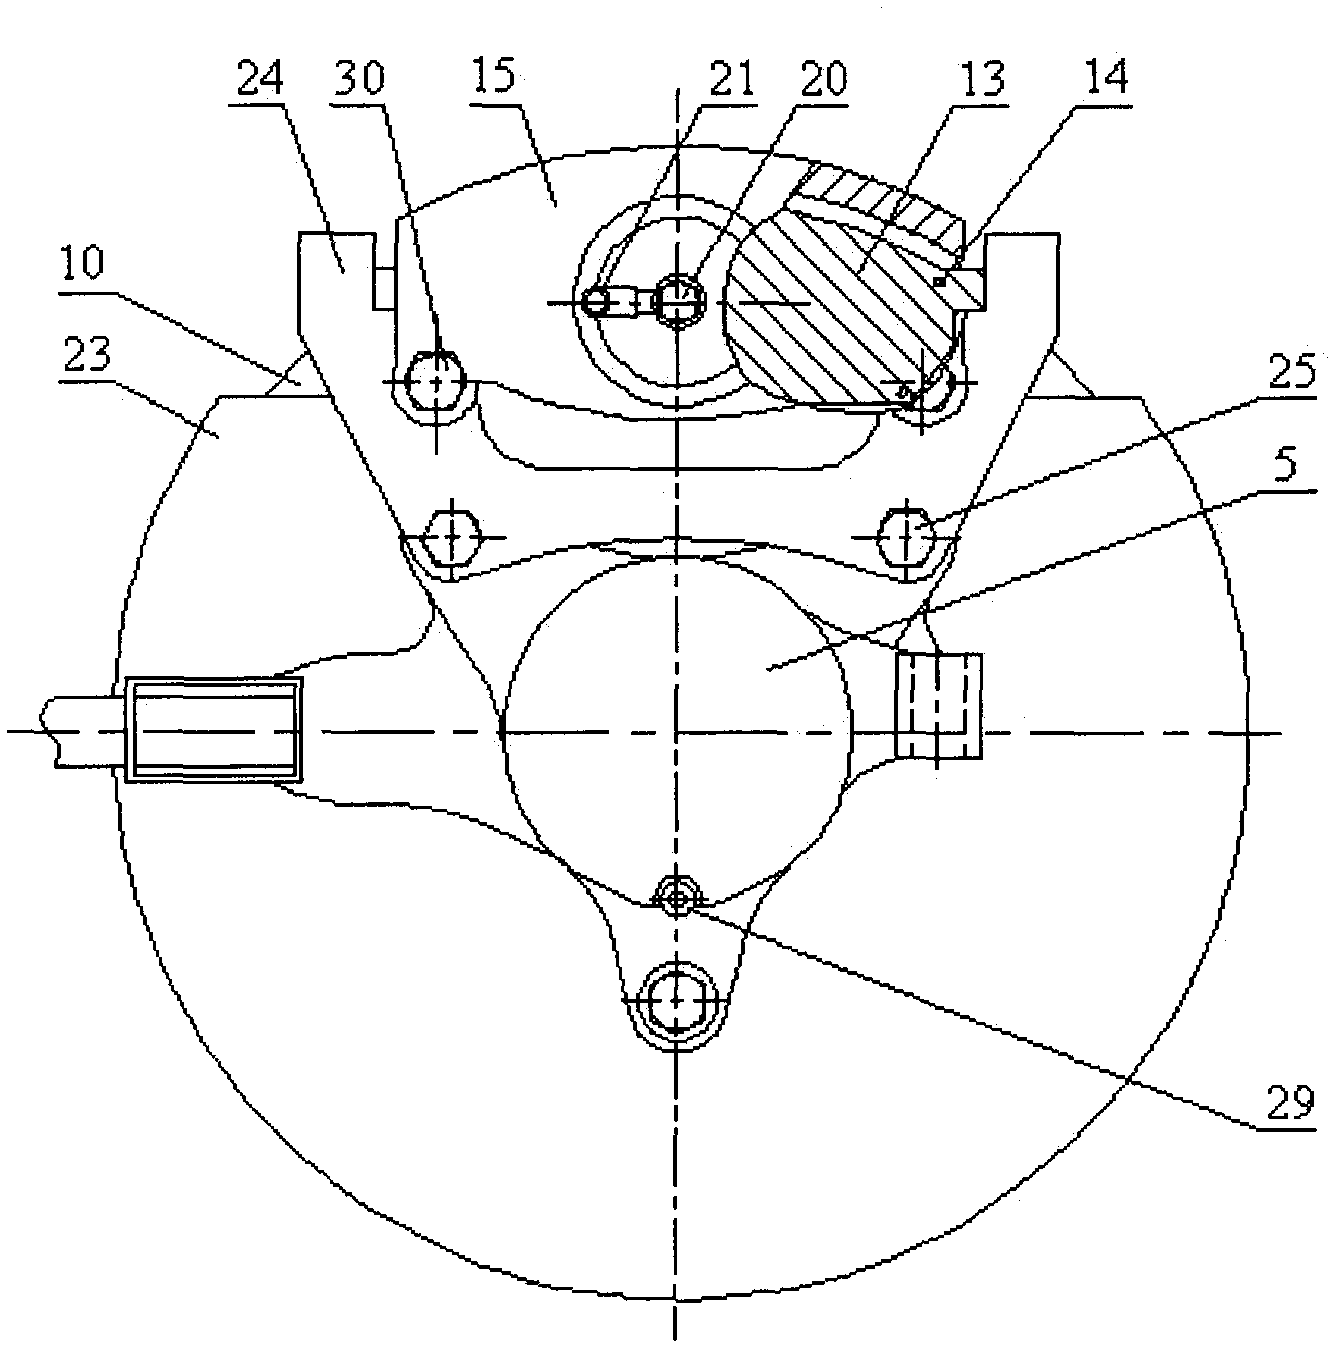 Automotive water-cooled disc brake